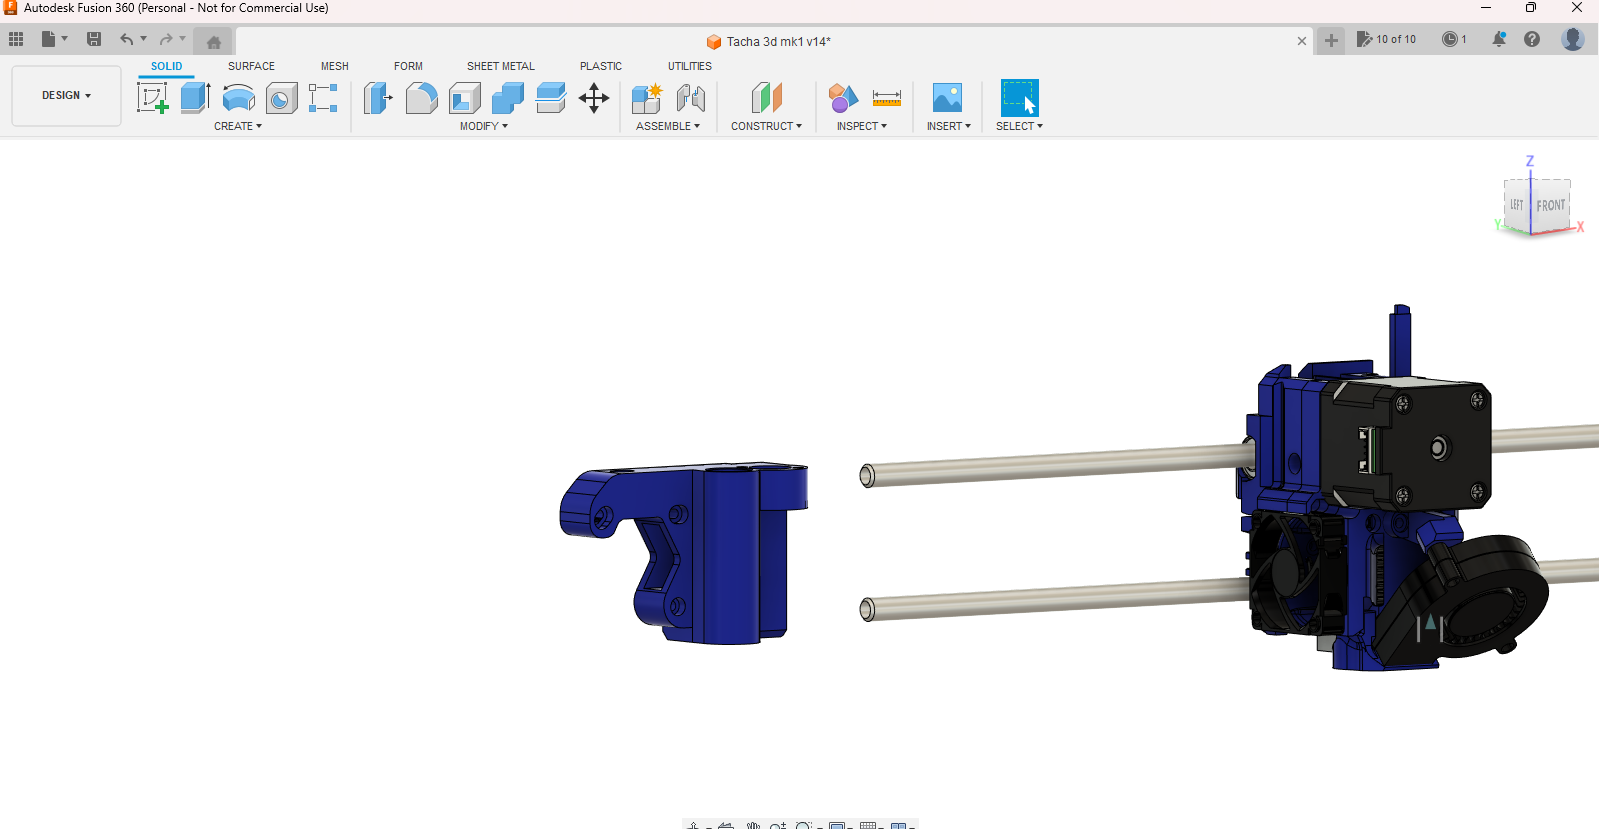 Autodesk Fusion 360 (Personal - Not for Commercial Use) 6_30_2023 9_05_01 PM.png